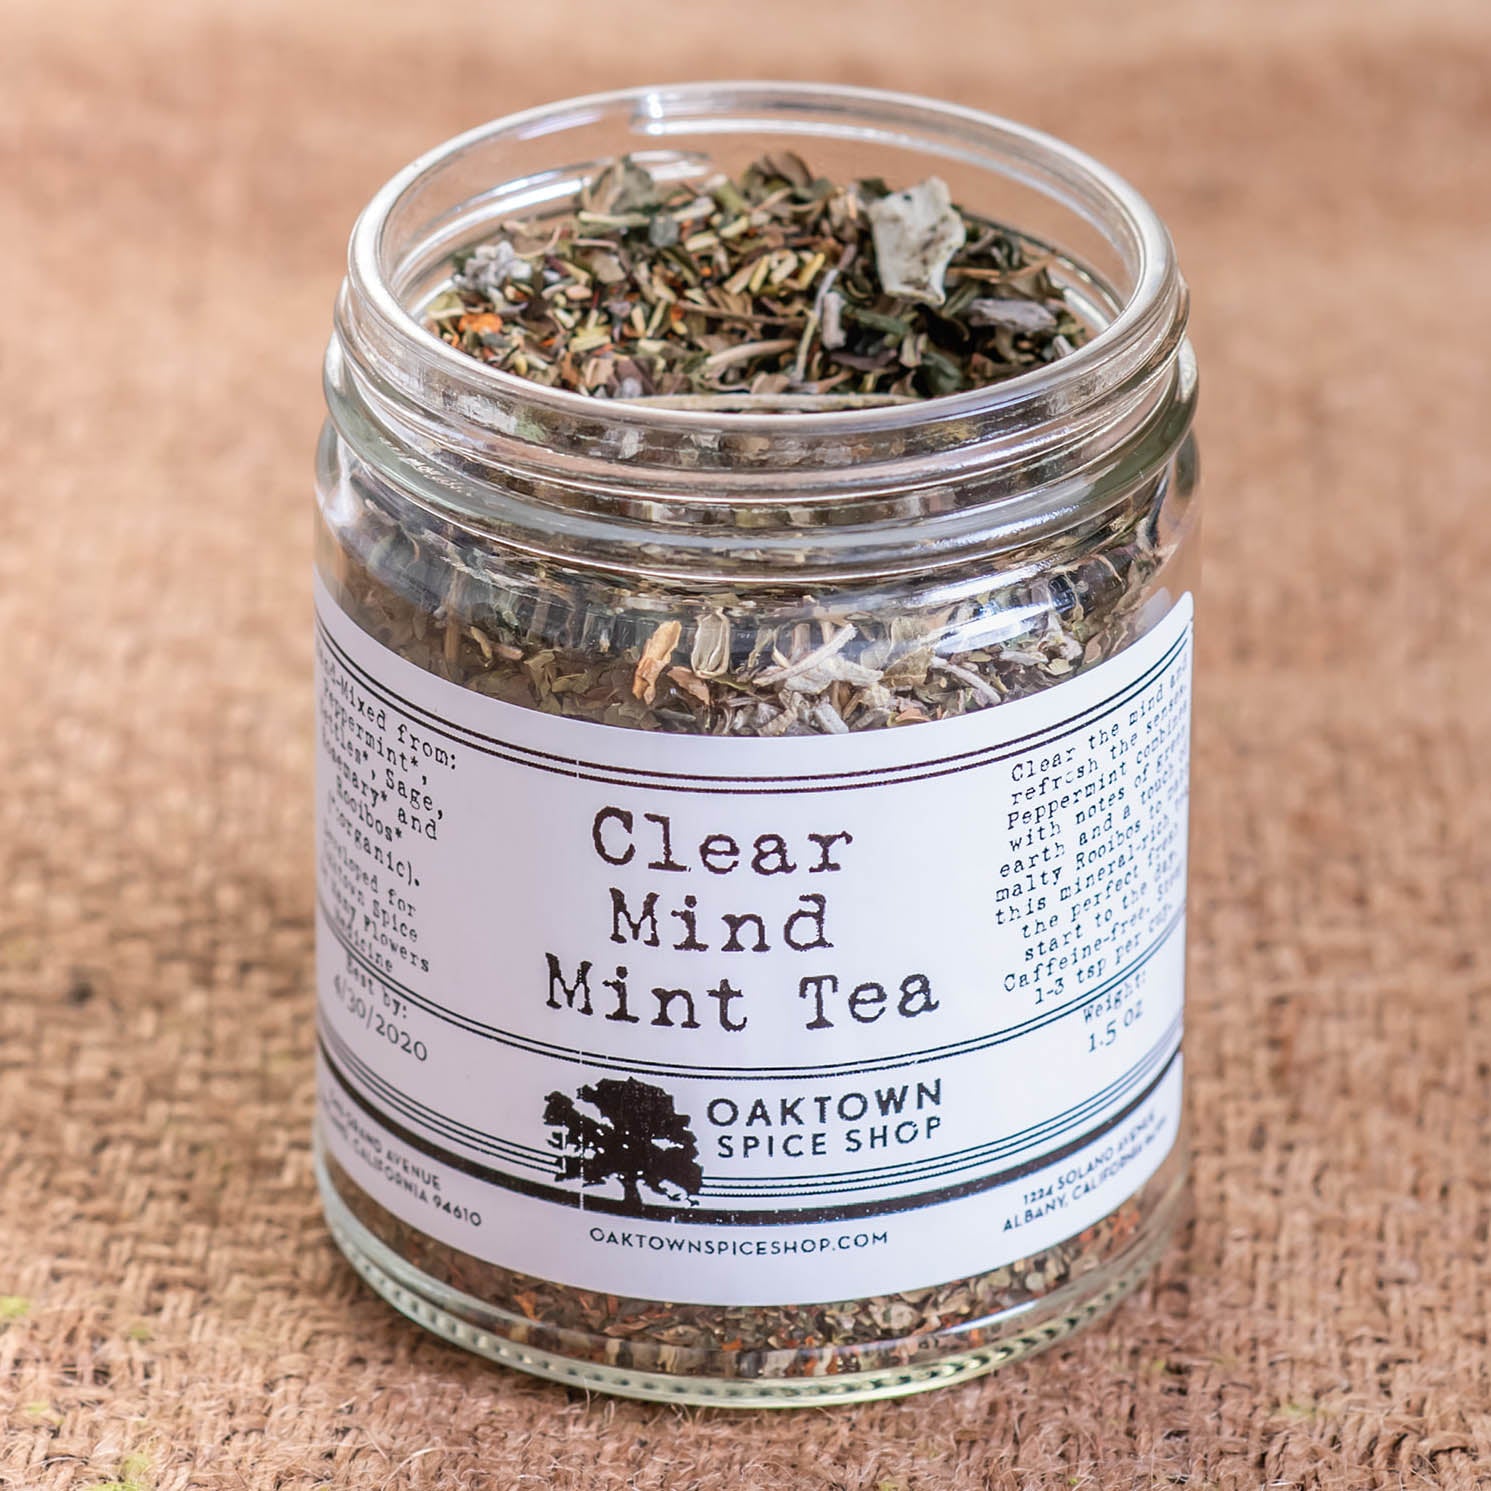 Clear Mind Mint Tea with Peppermint and a touch of malty Rooibos from Oaktown Spice Shop